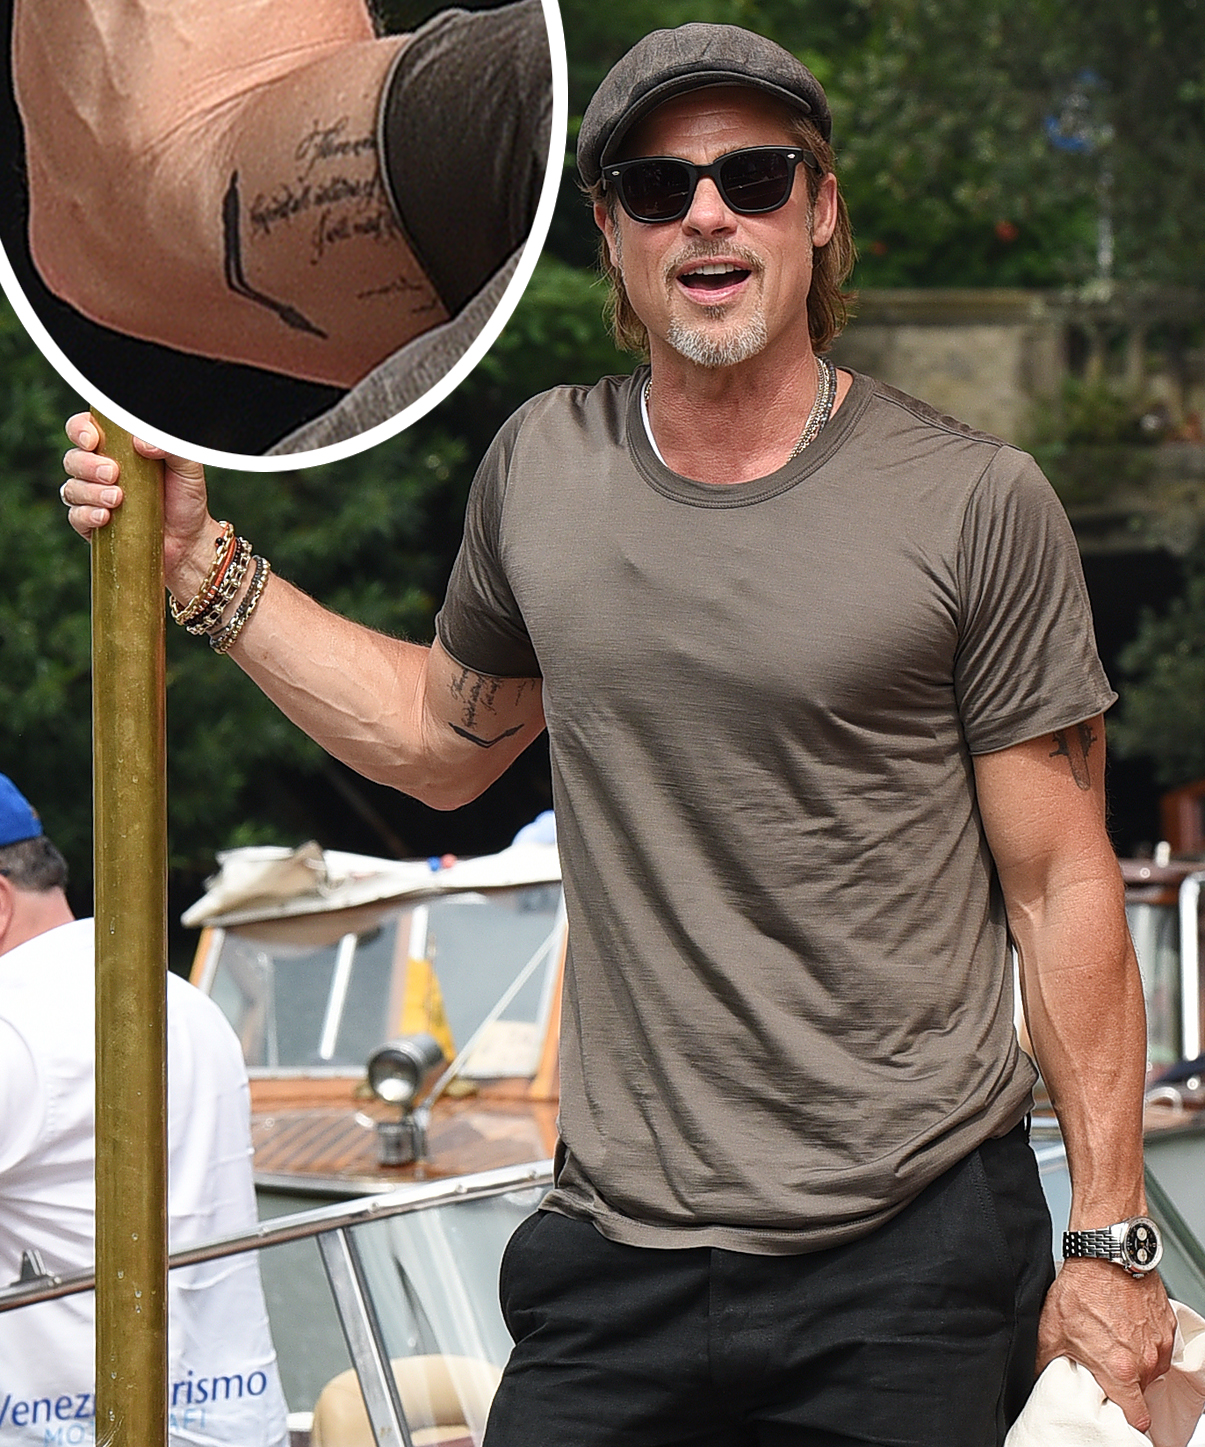 Brad Pitt Tattoo Collection His Ink Photos Meanings of Tattoos